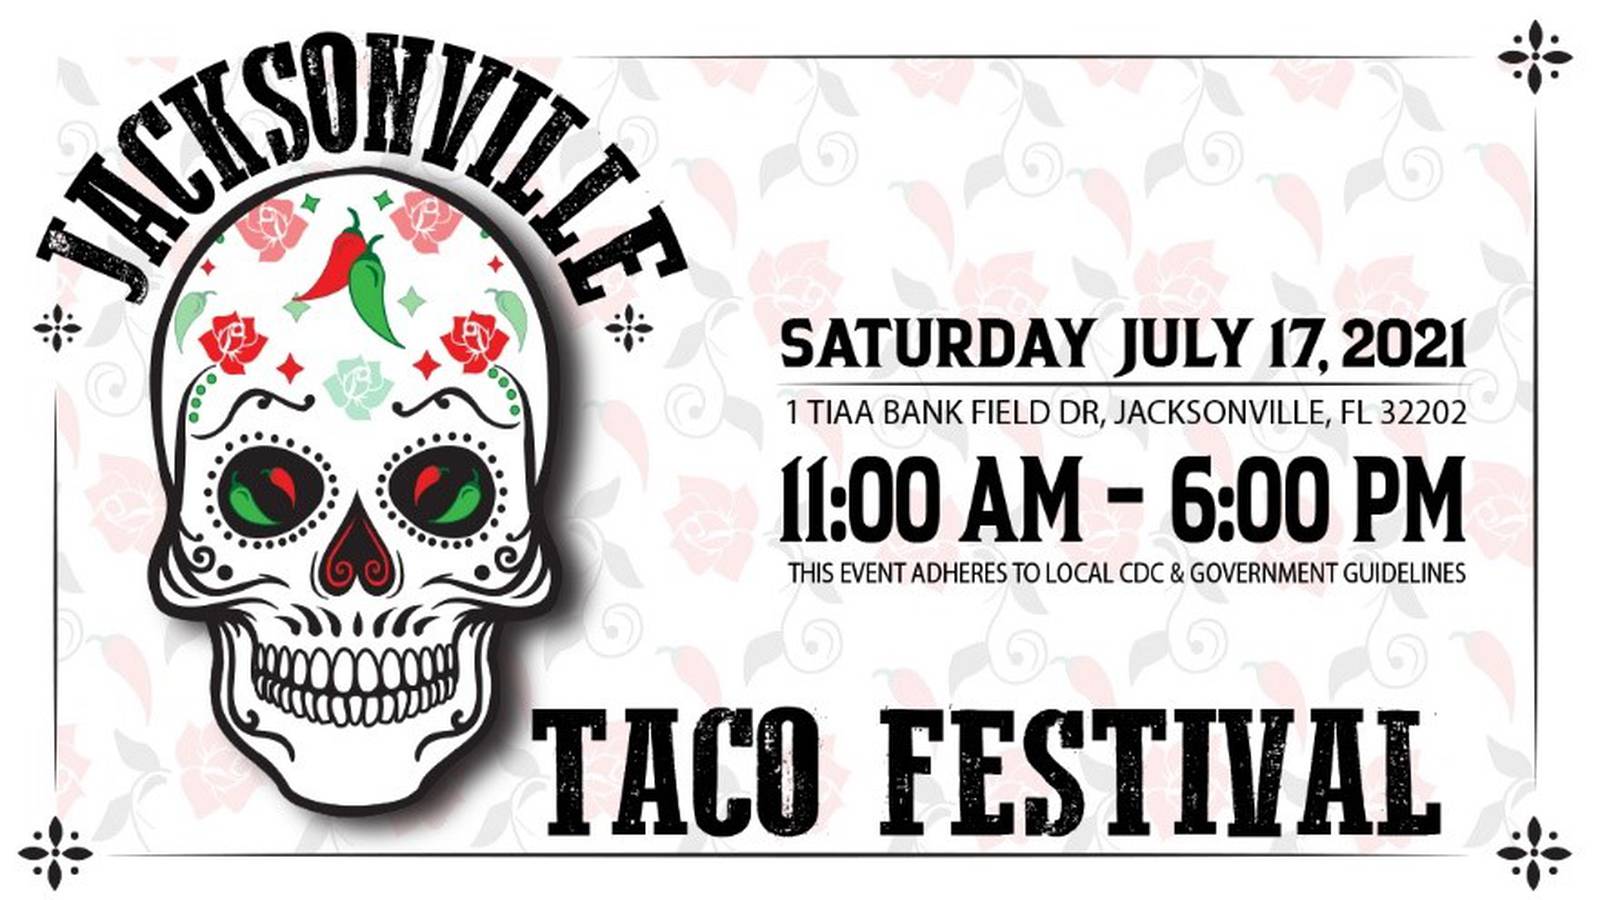 Taco festival coming to Jacksonville’s TIAA Bank Field in July Action